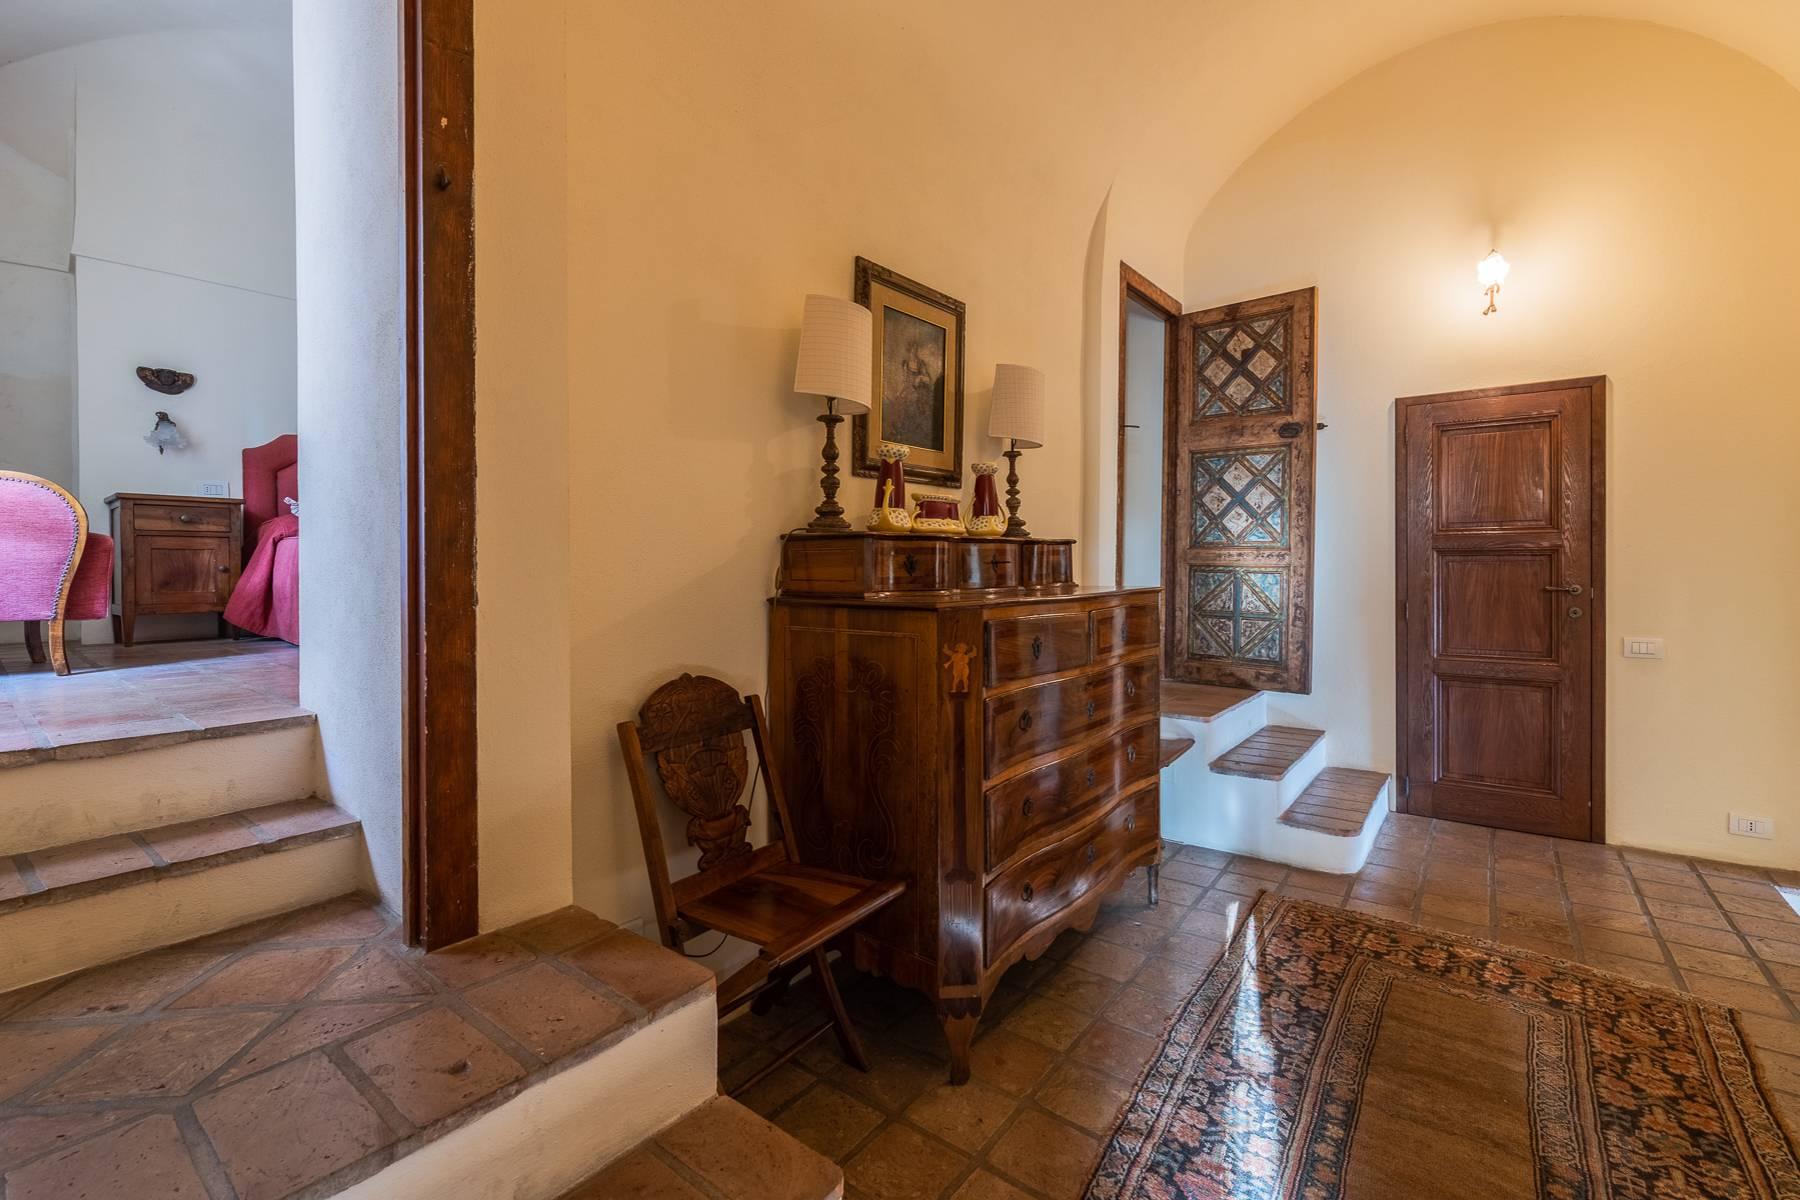 Charming villa in Torre Saracena, nestled in a tiny historic village overlooking Sanremo - Private Auction - 34